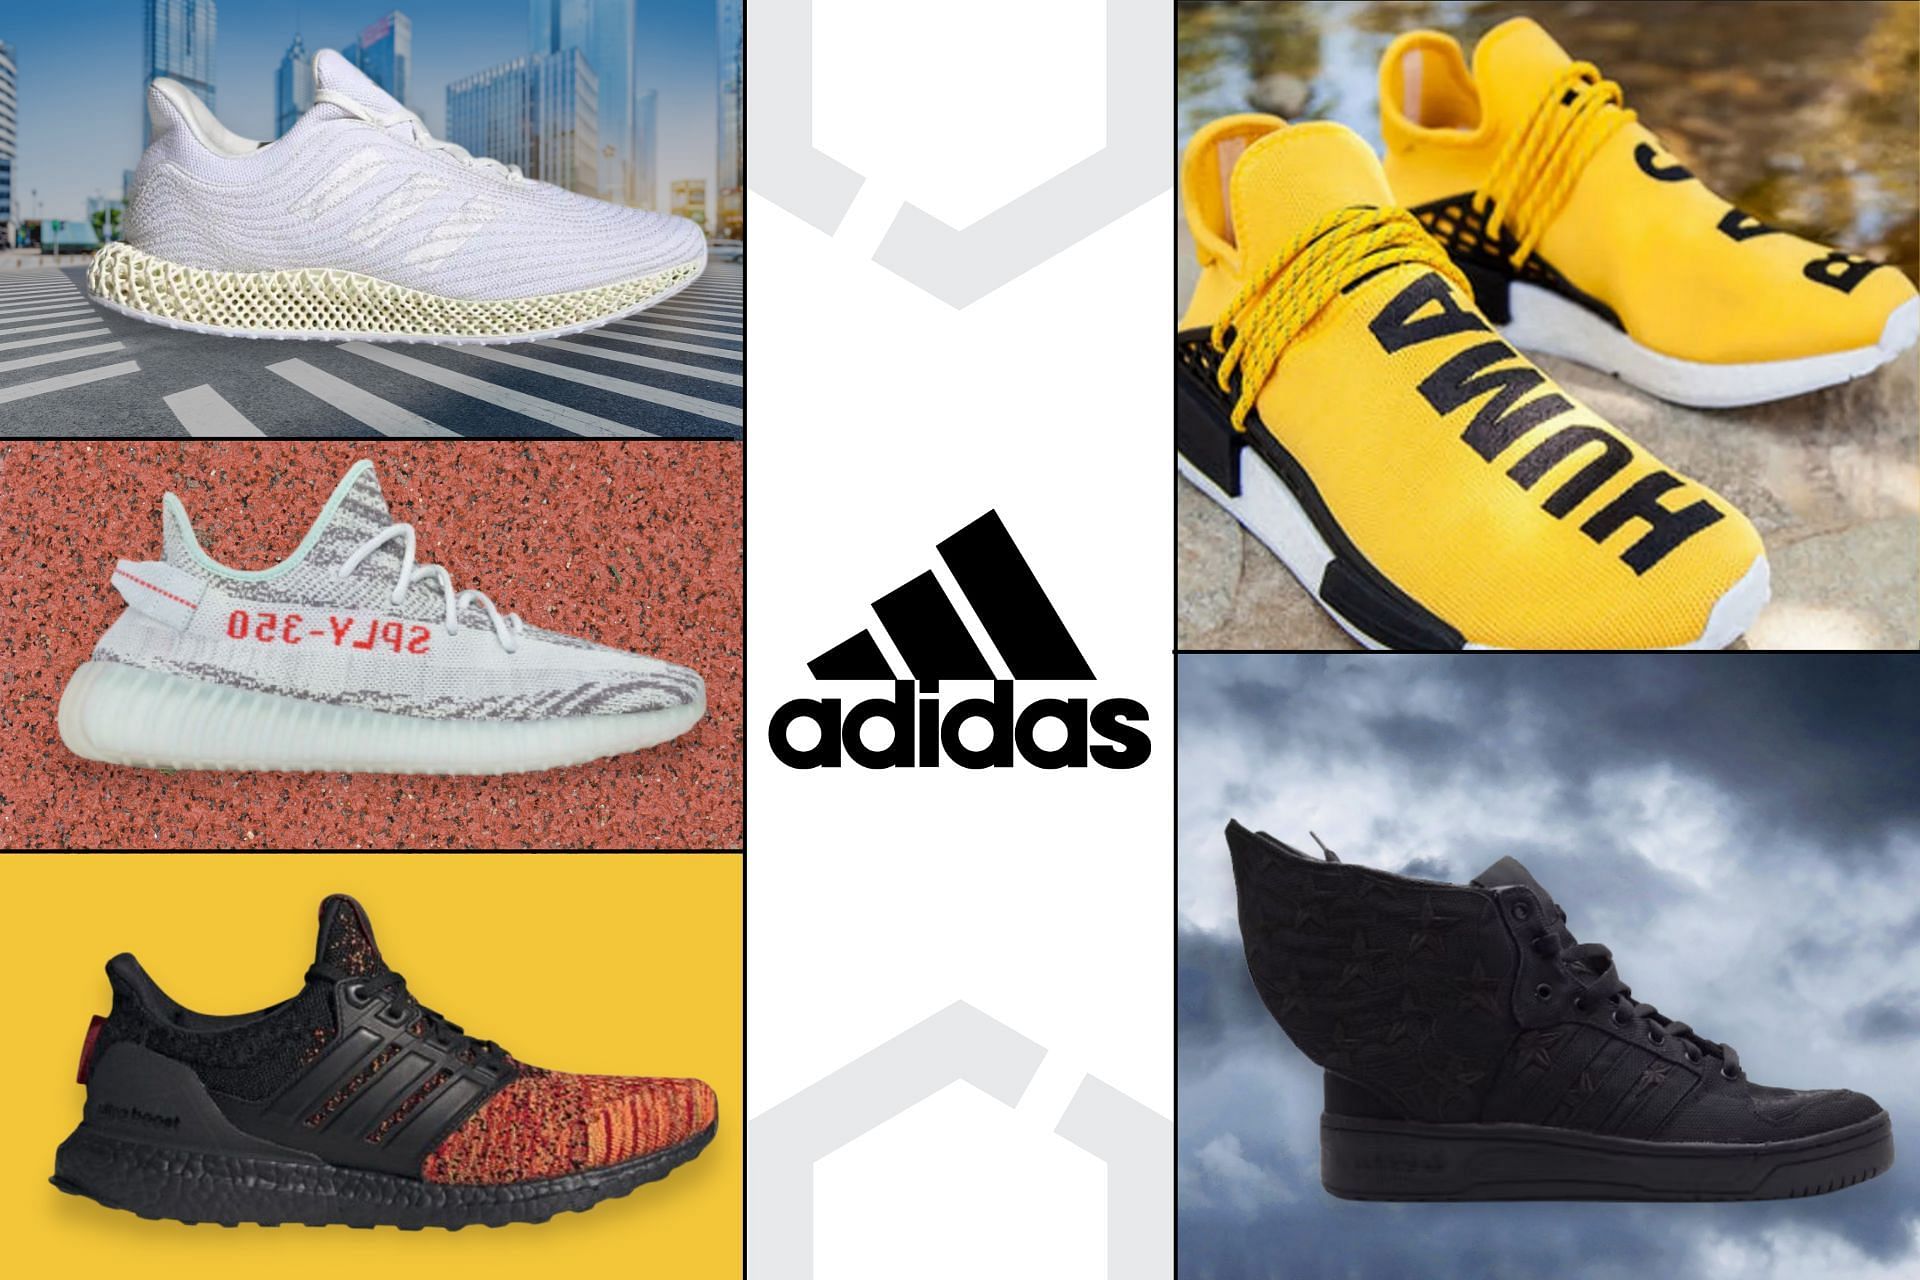 preferible fluir Mentalidad 5 best Adidas collabs of all time